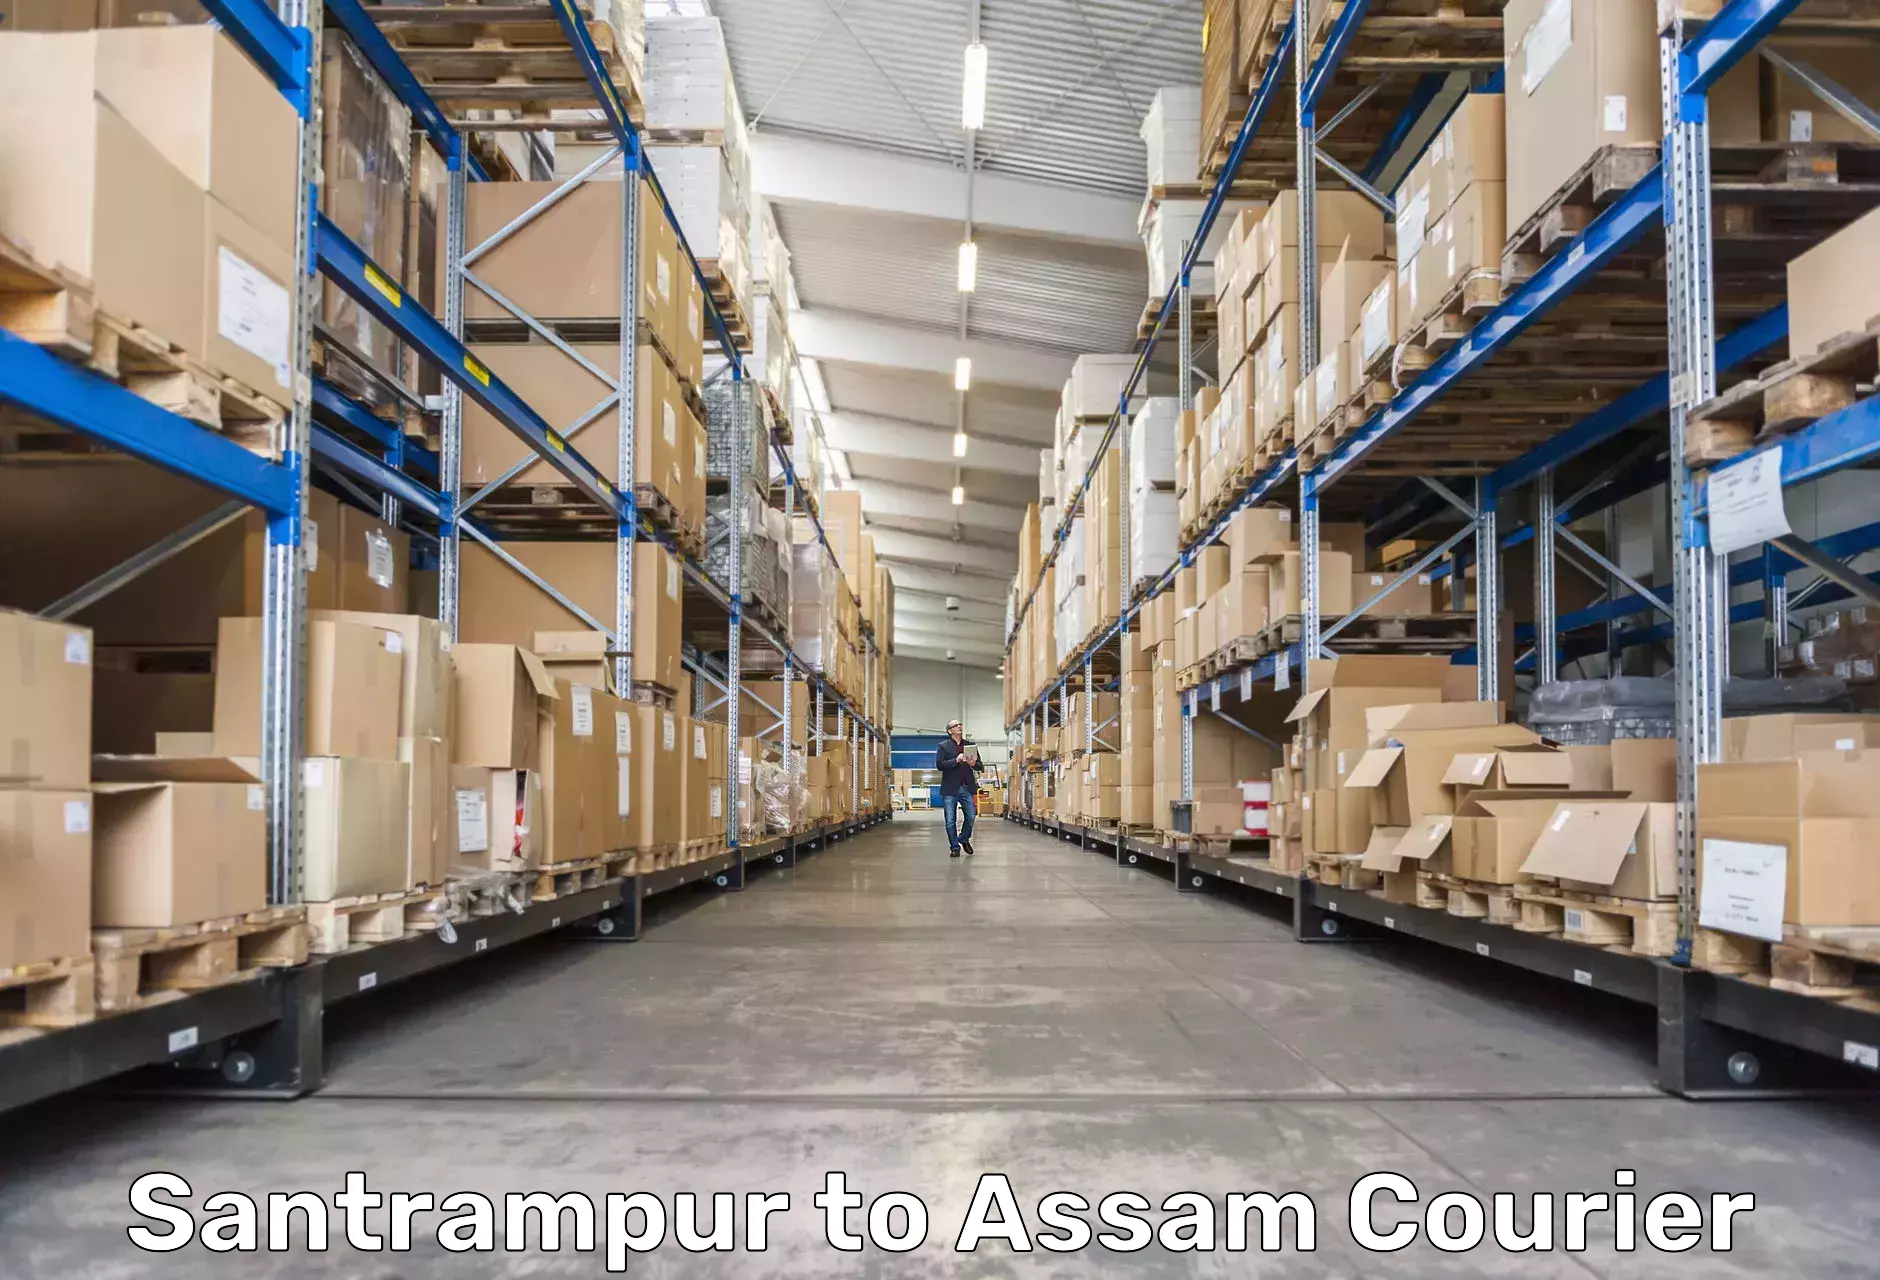 Reliable shipping partners Santrampur to Lala Assam